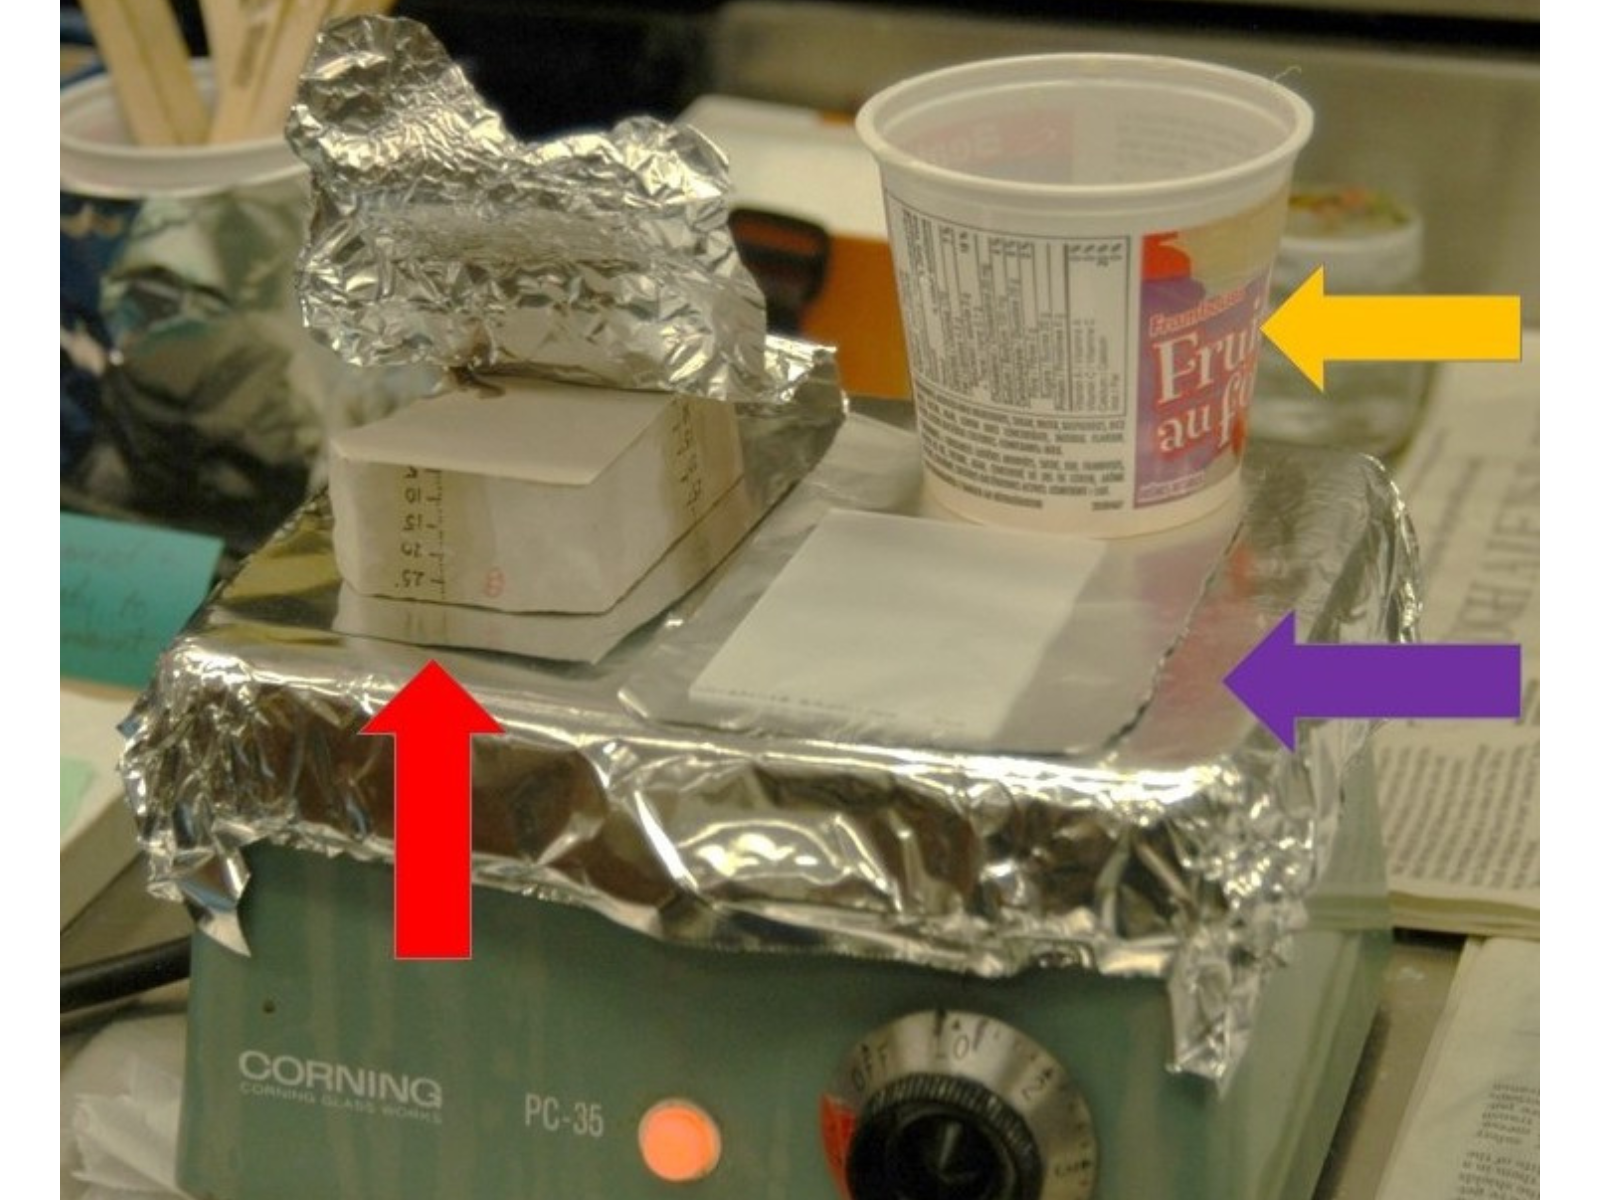 A foil covered hot plate with three objects on it. With a red arrow pointing to it, on the left, is a fossil block, with foil peeled back from the top. WIth a purple arrow pointing to it, on the lower right, is a glass slide, and with a yellow arrow pointing to it, on the upper right, is a recycled yogurt container.